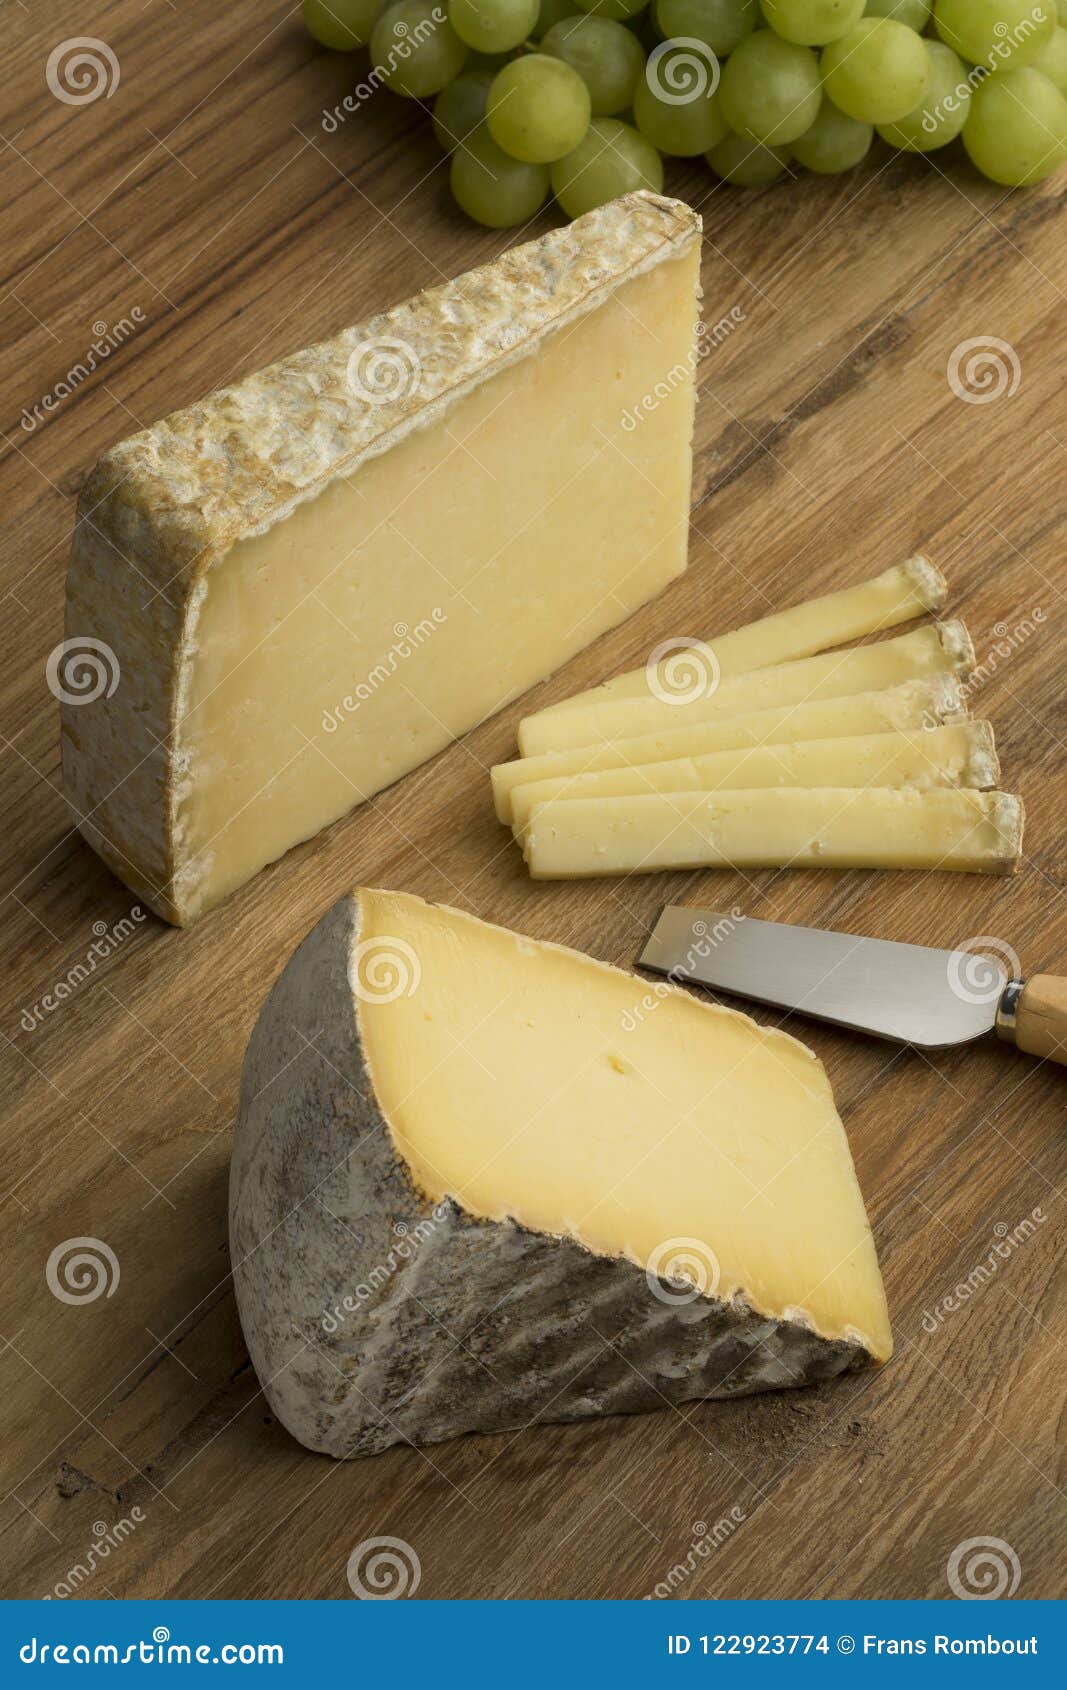 french tomme de montagne and cantal cheese